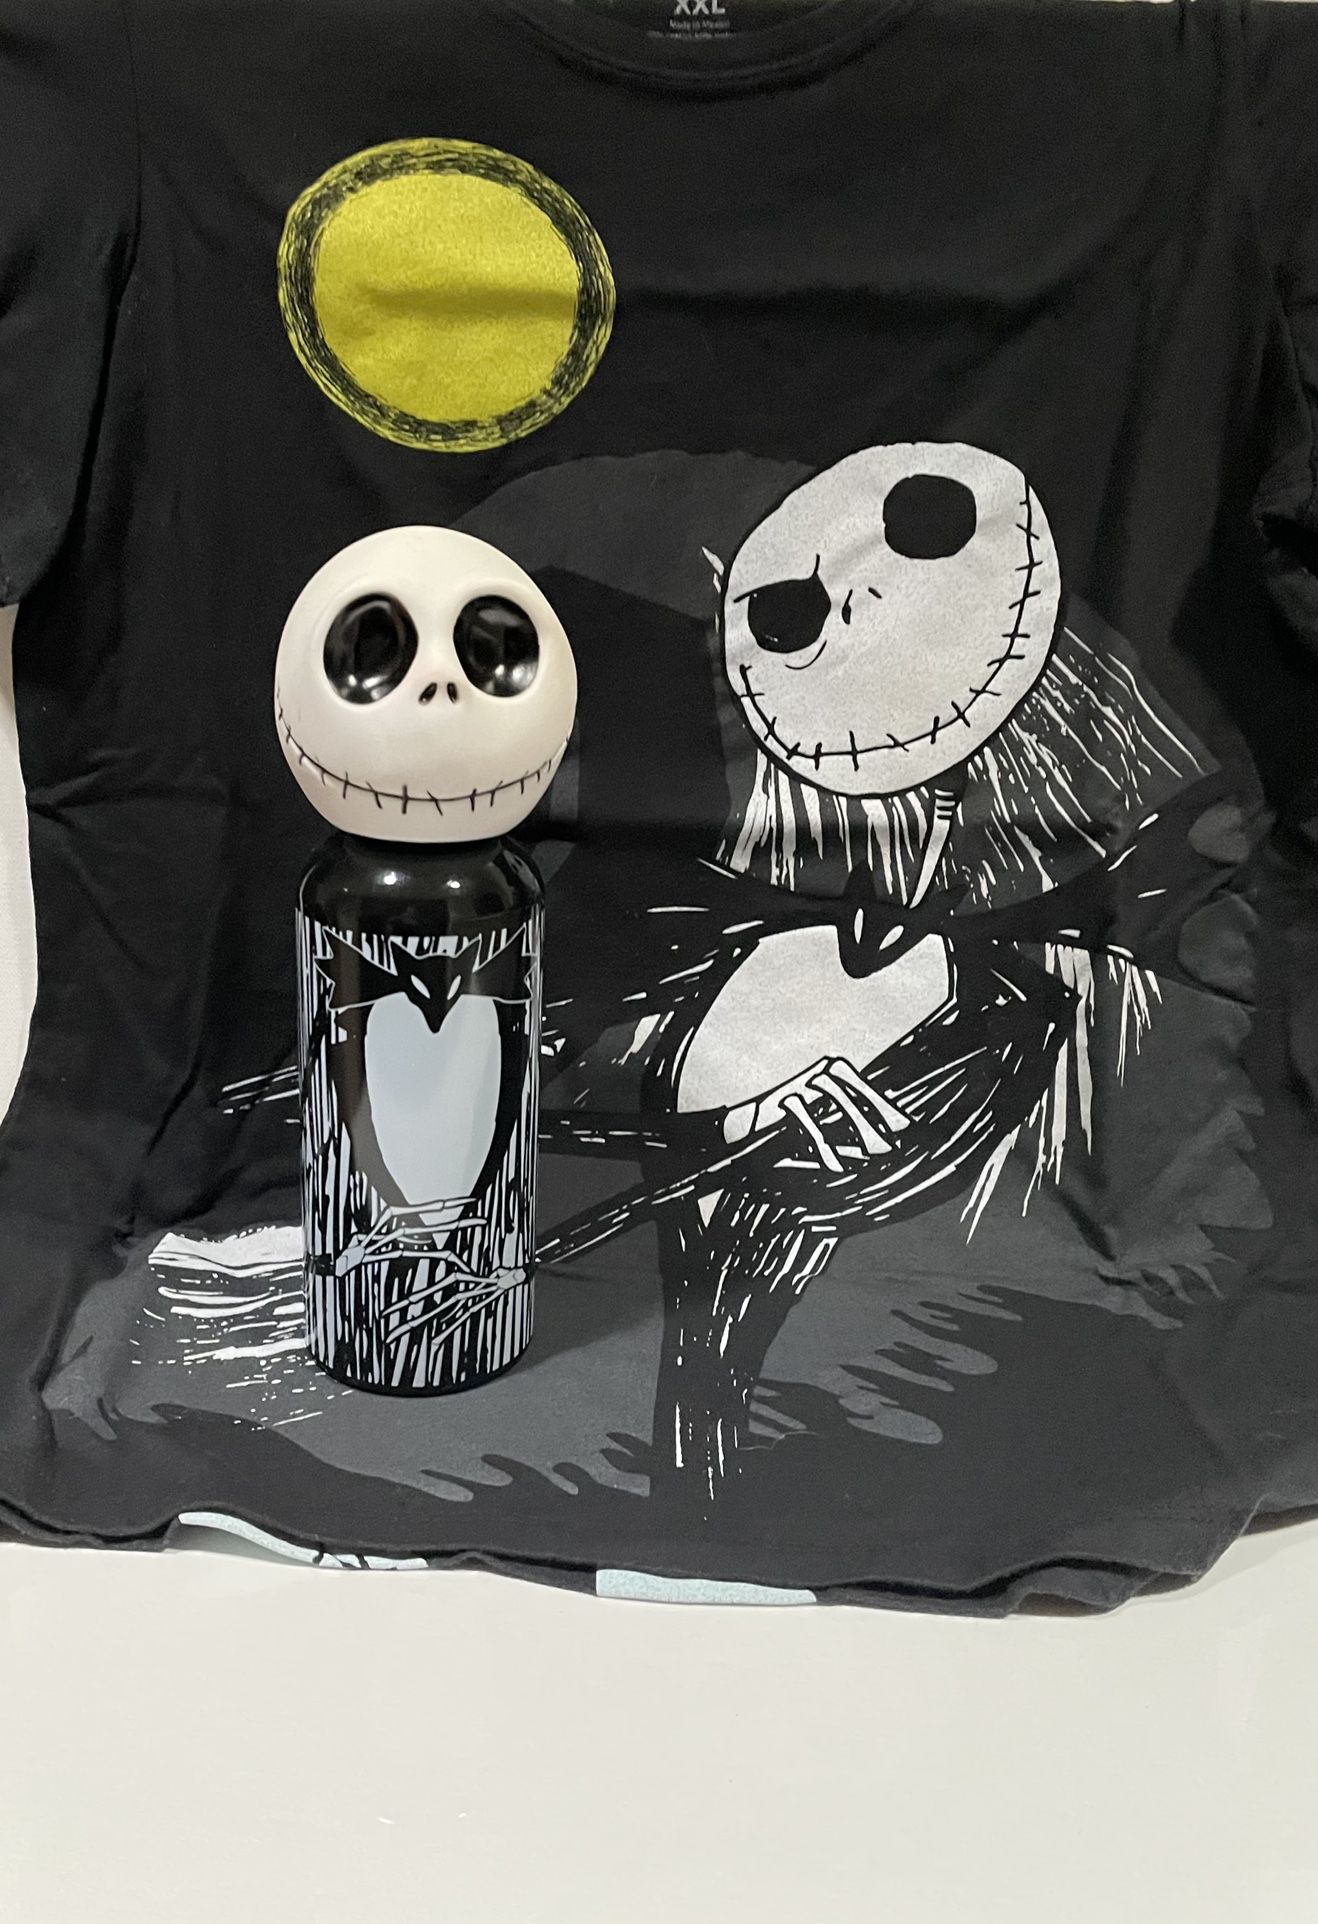 Nightmare Before Christmas Shirt And Water Bottle 